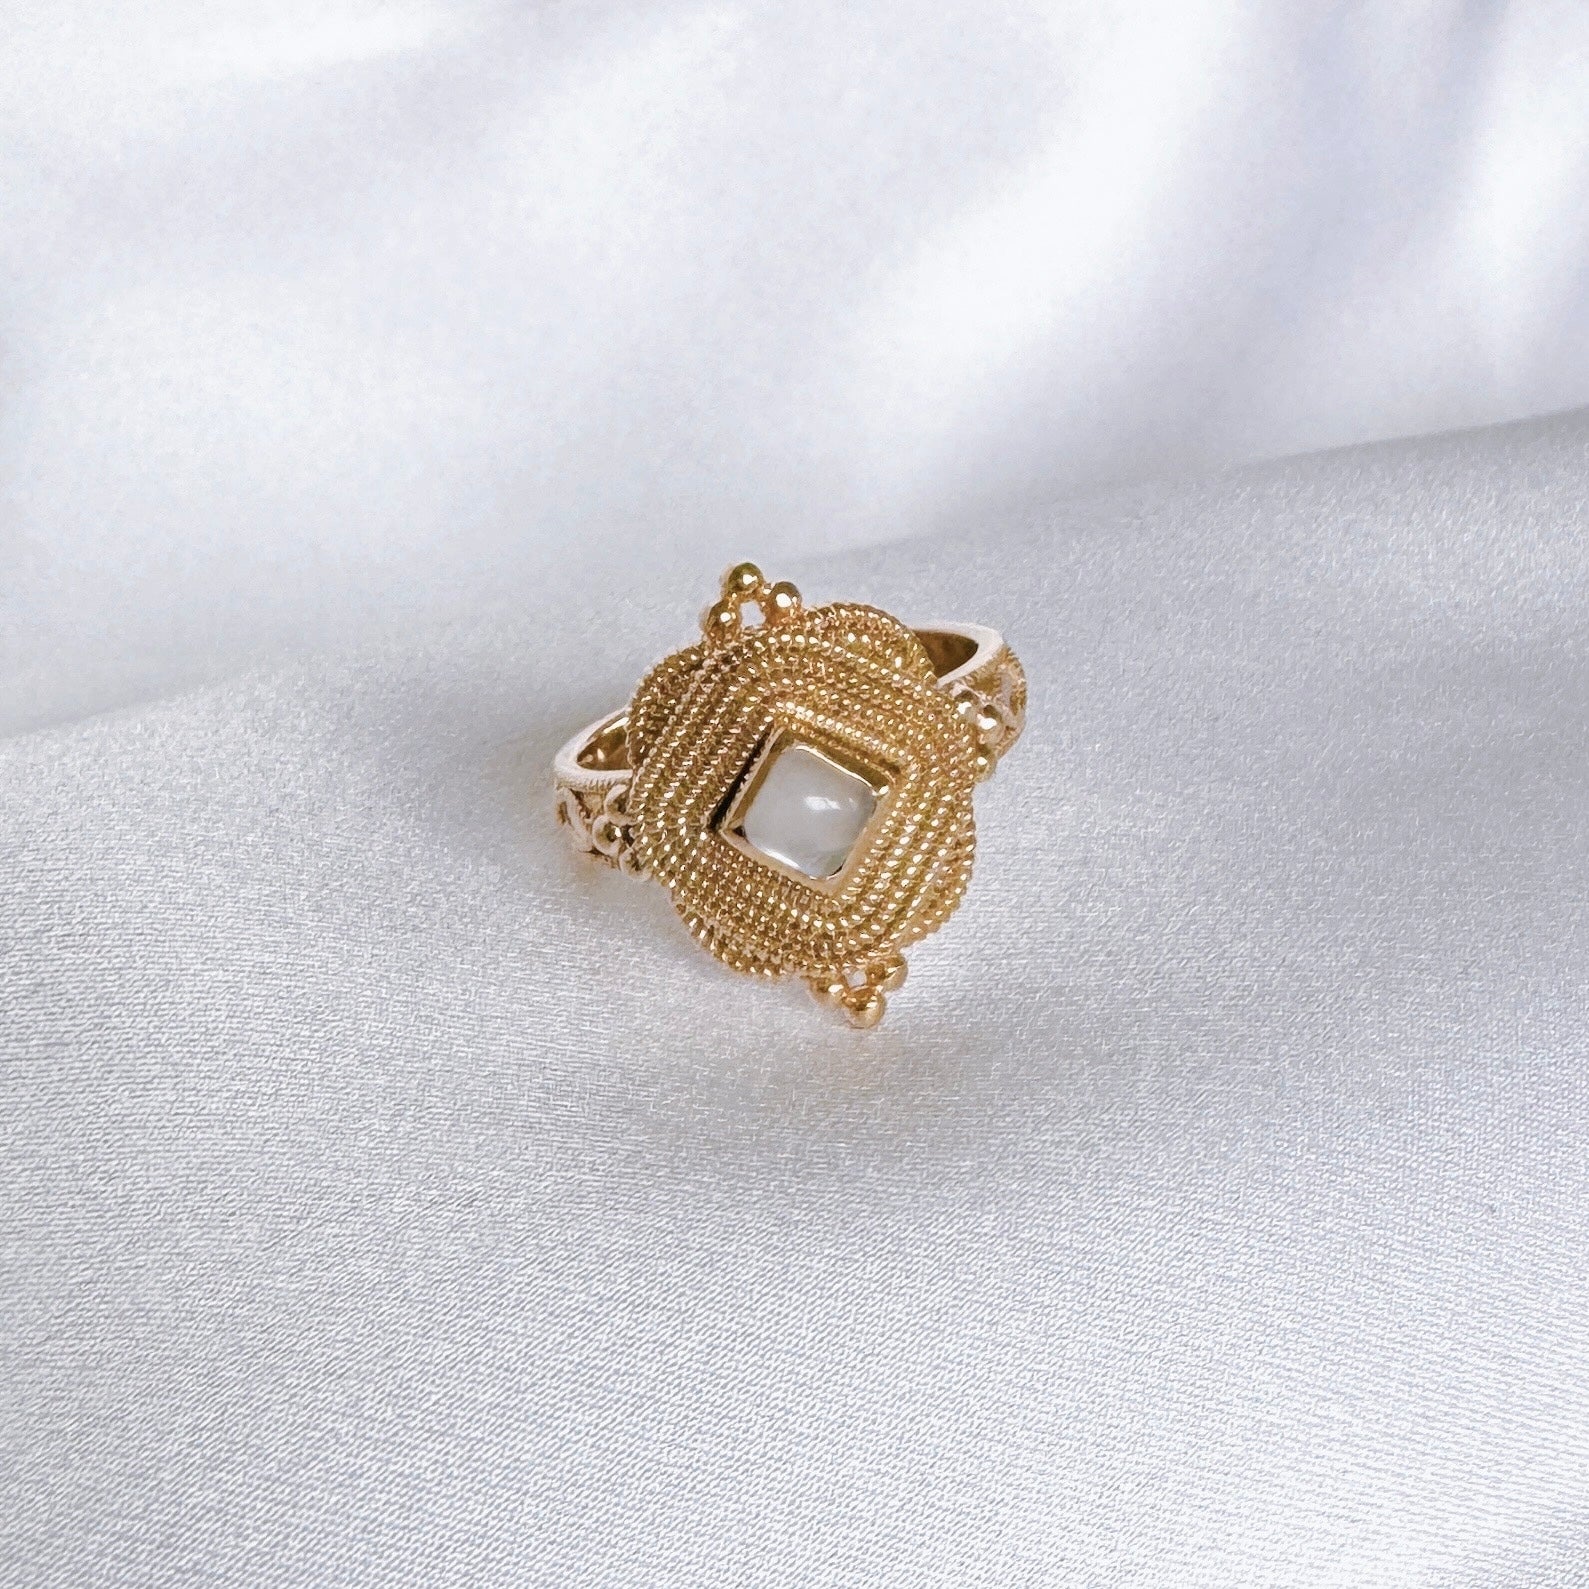 Gold-plated “Poetry” ring